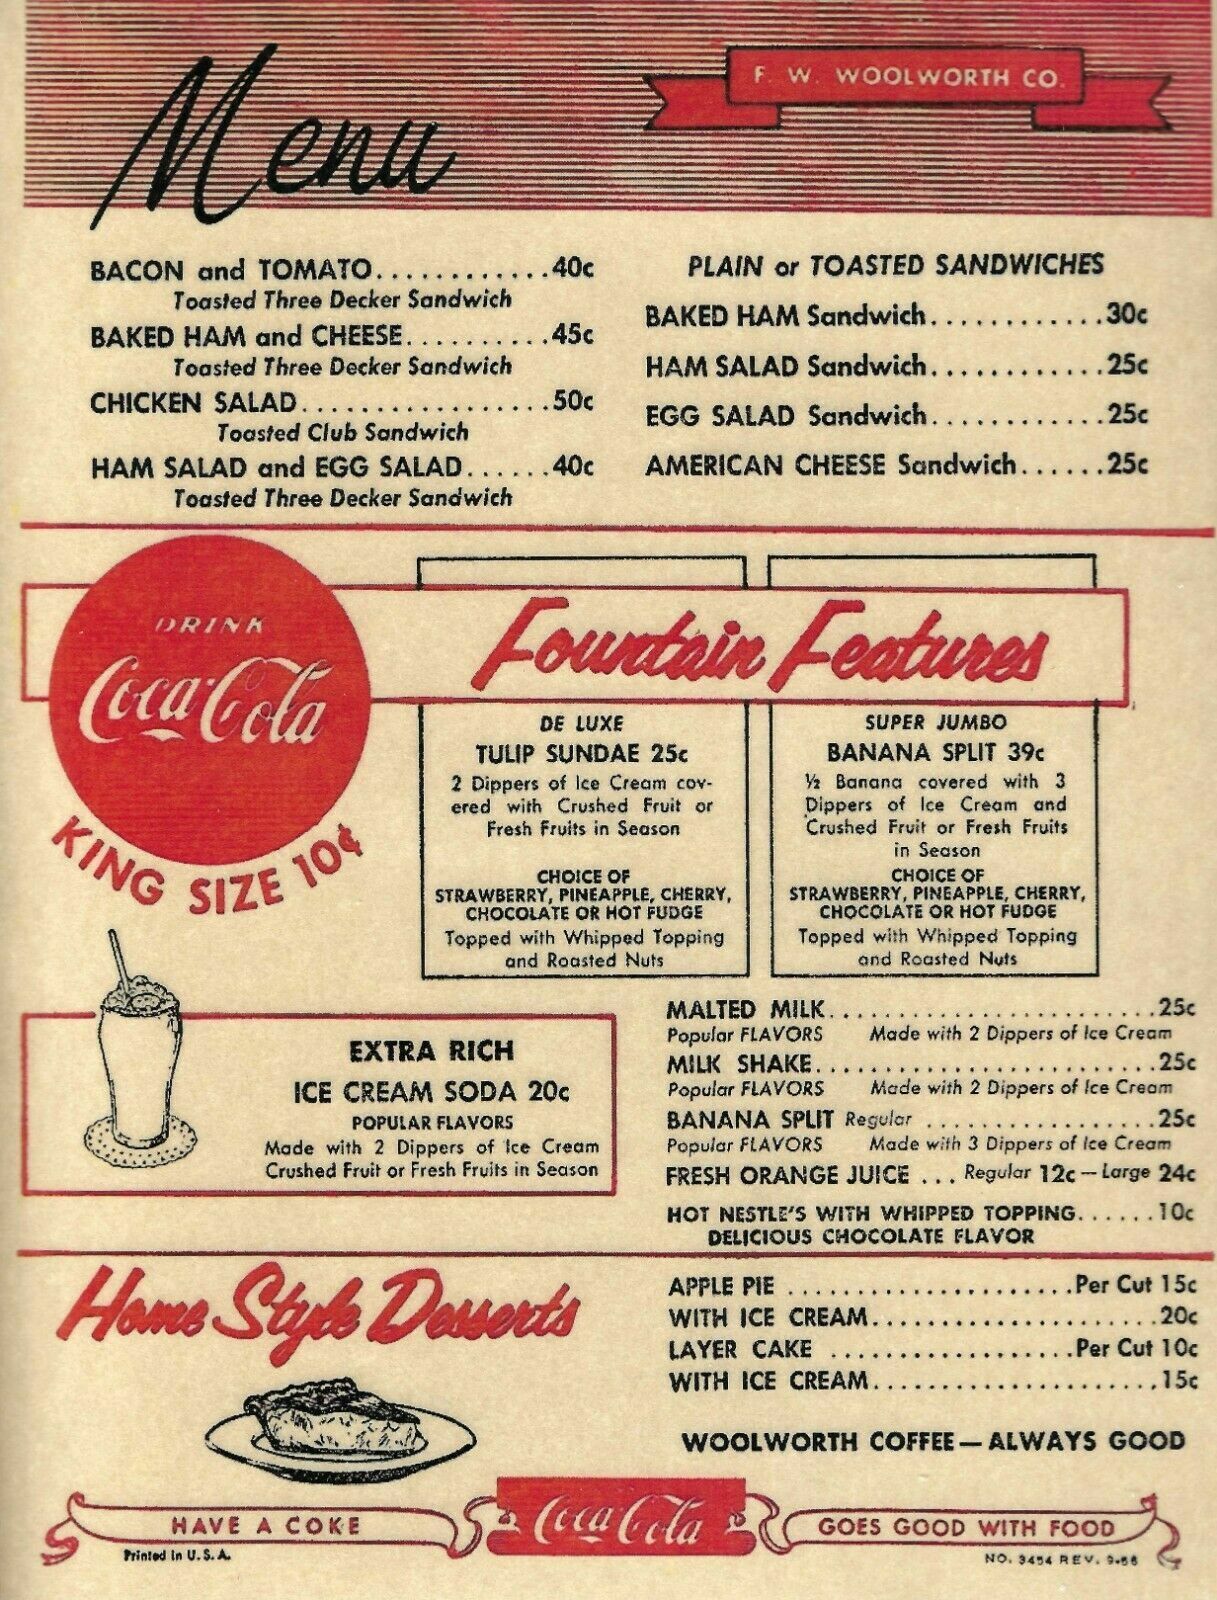 F.W. WOOLWORTH  LUNCH COUNTER MENU 8x5x11 GLOSSY REPRINT VINTAGE